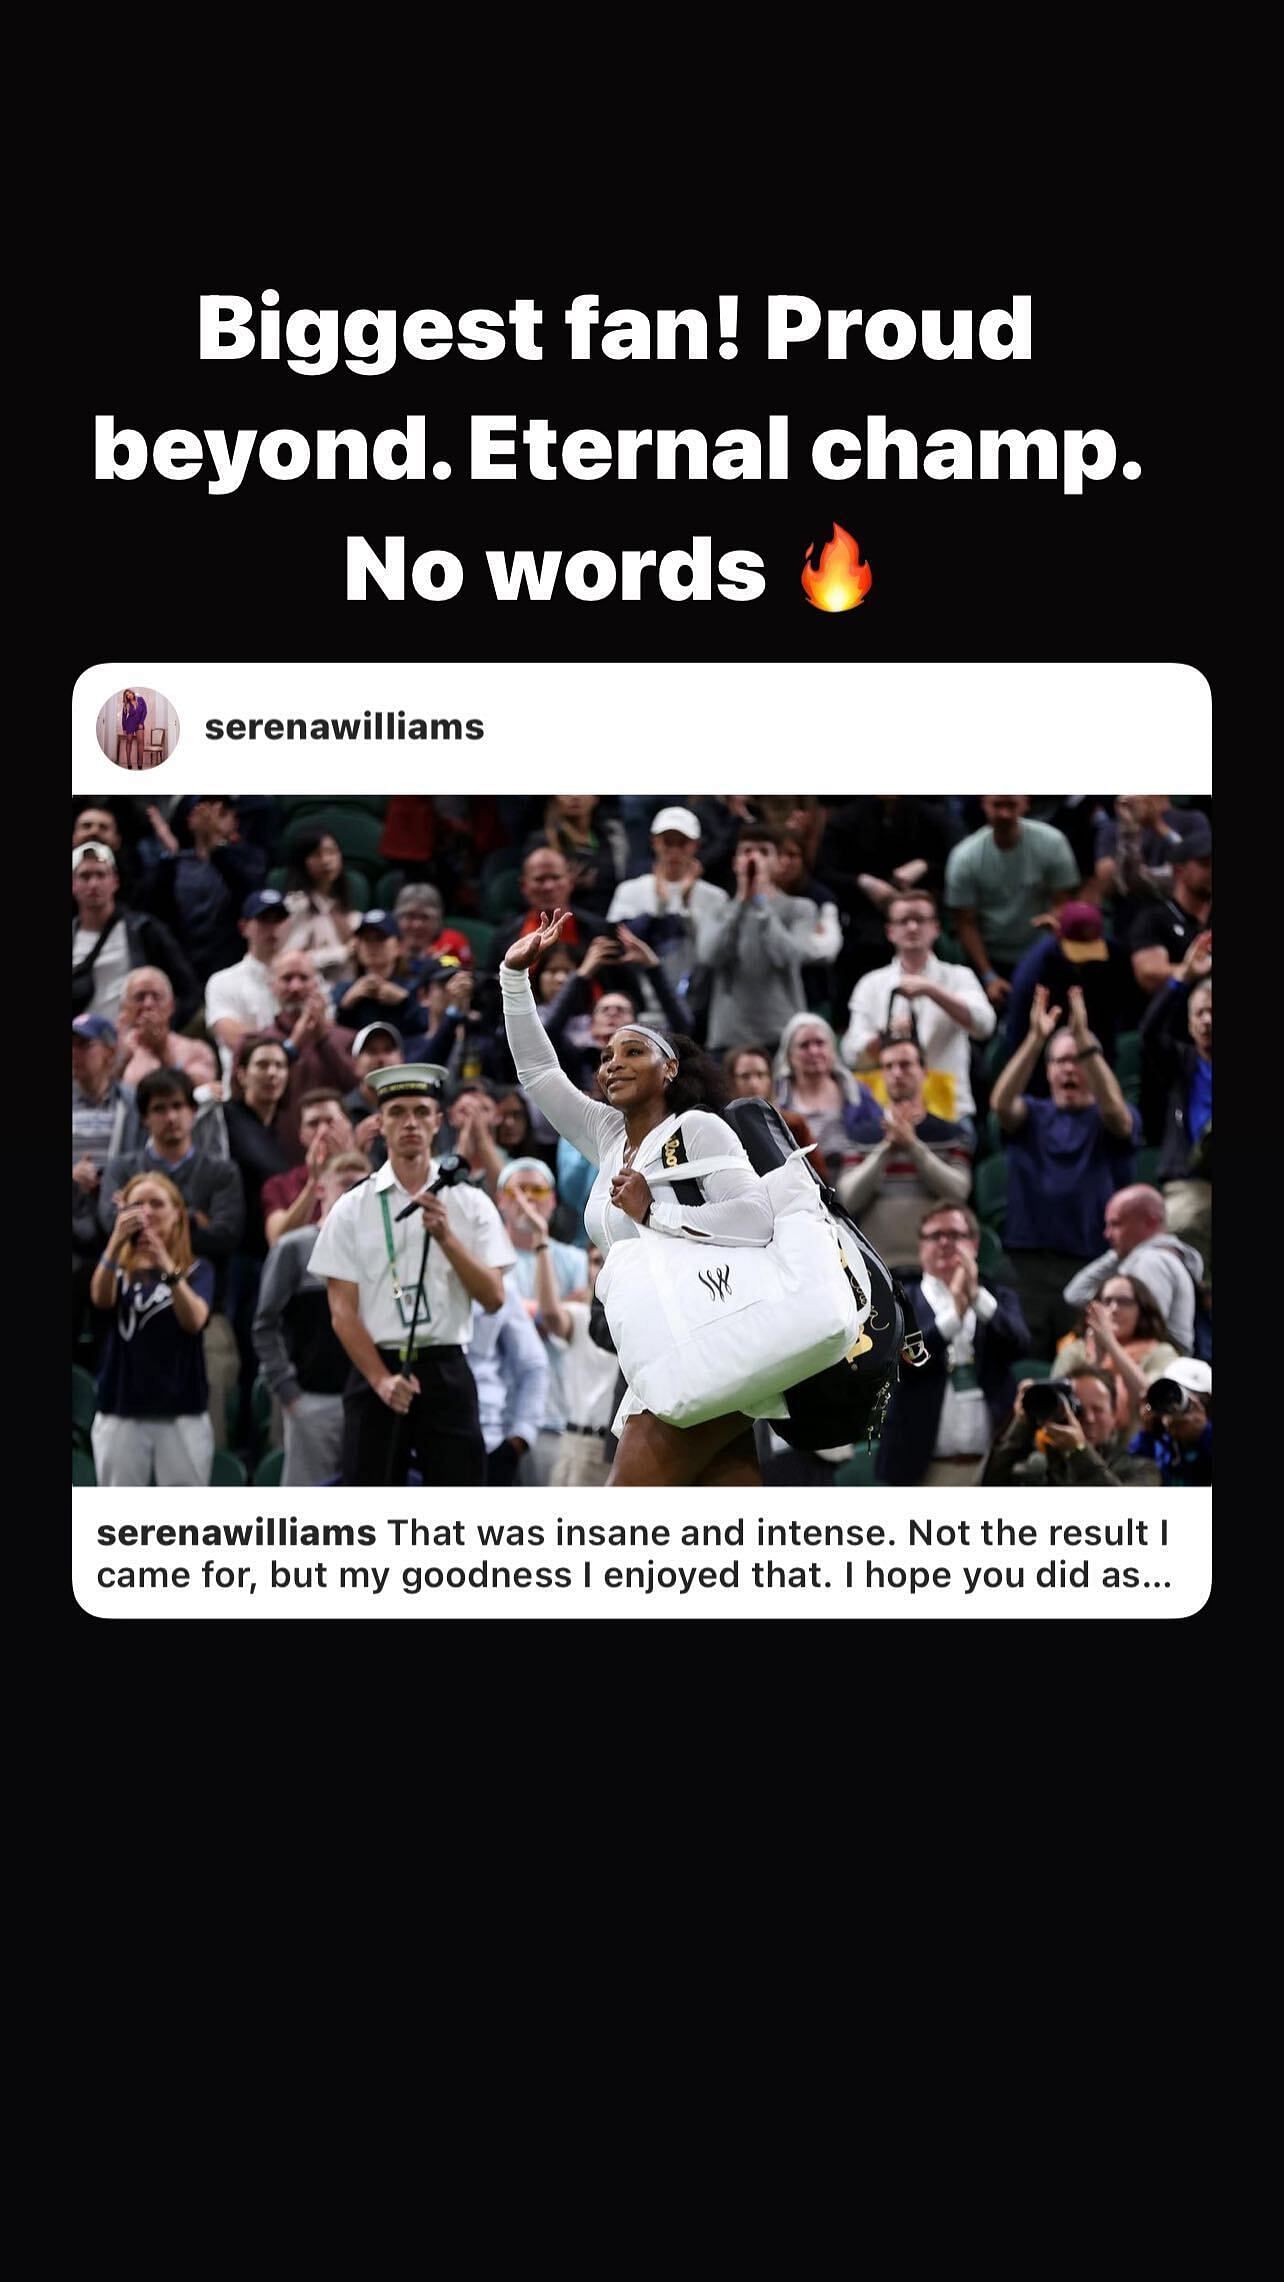 Venus Williams put up a story to show admiration for Serena Williams.